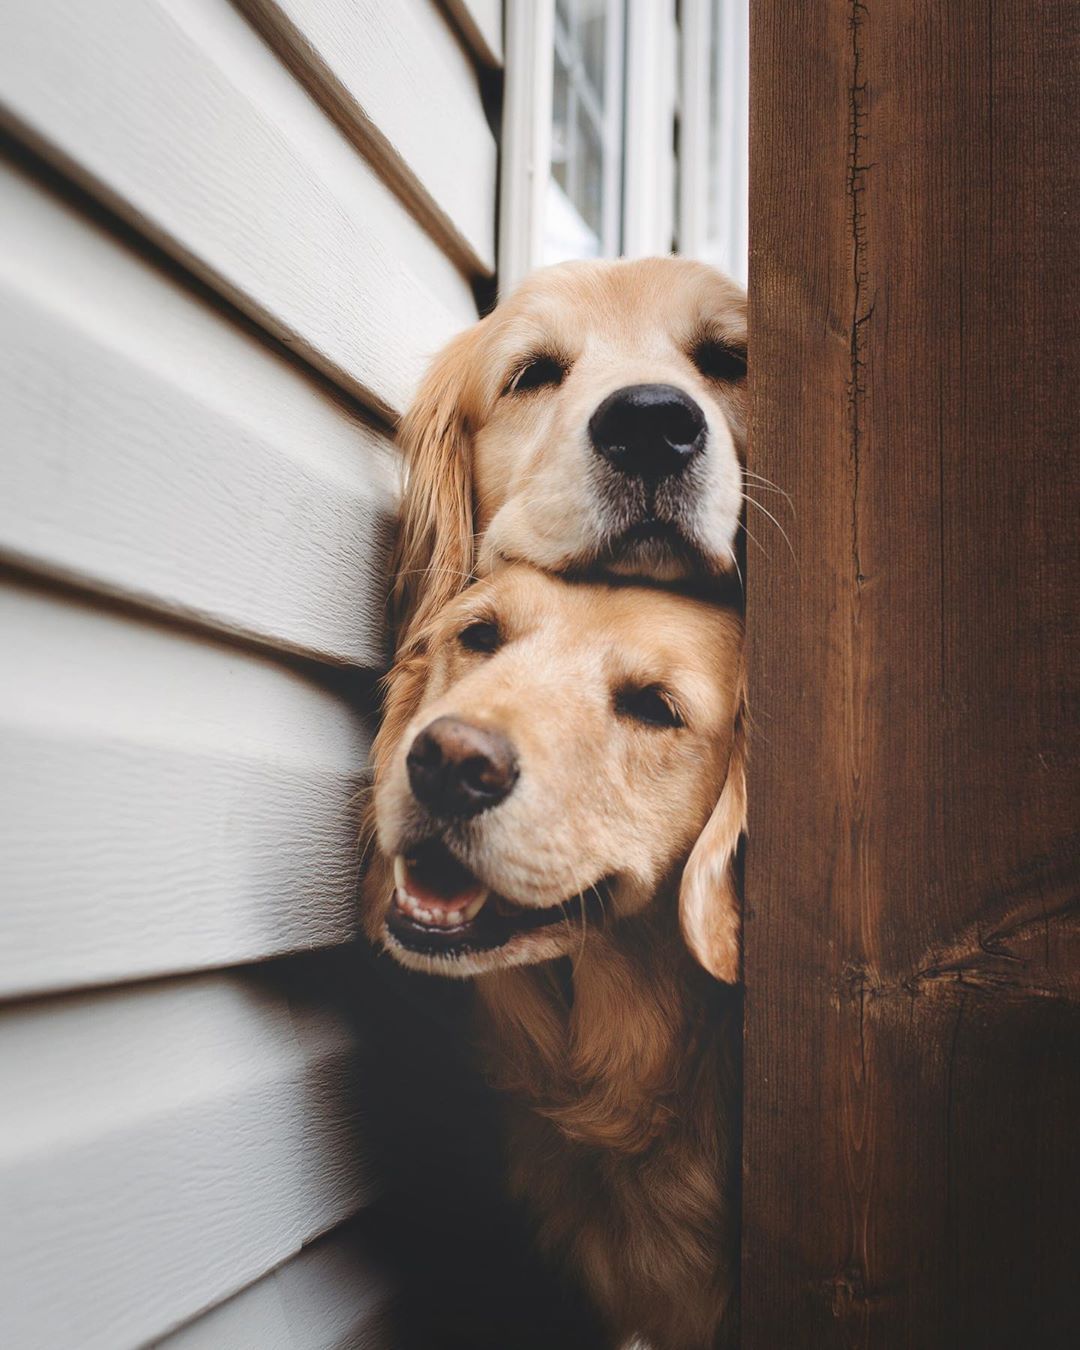 22 Animal Instagram Accounts You Have to Follow - Cute Animal Photos